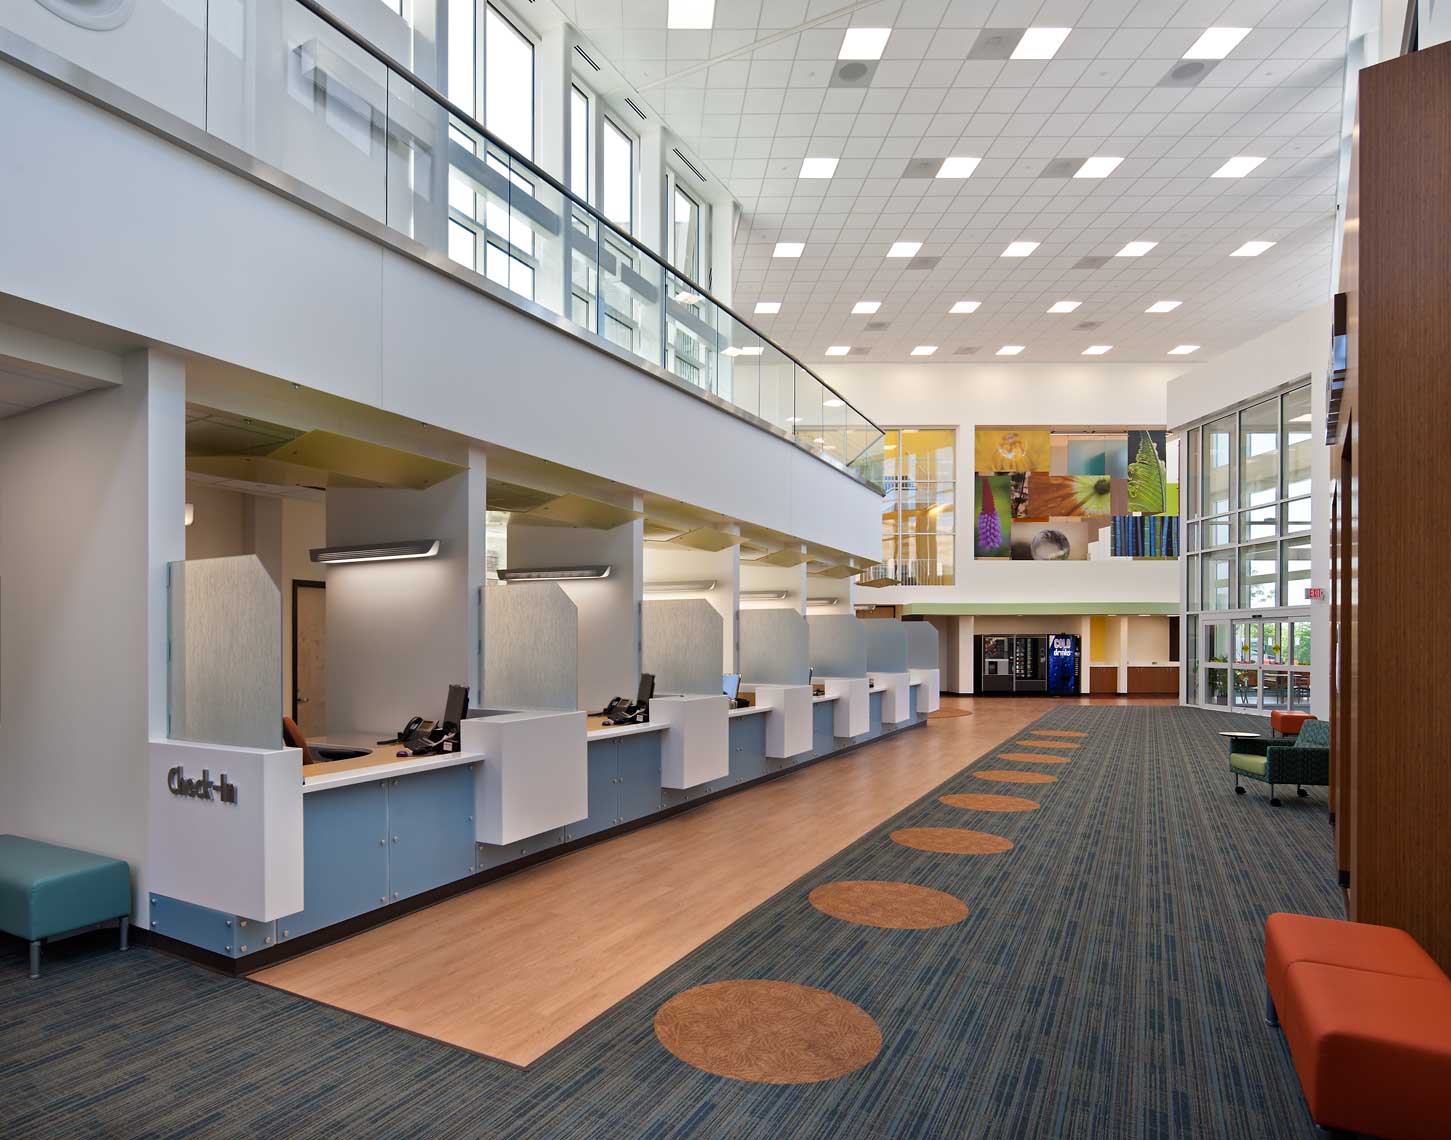 A bright and colorful photo of the lobby of TownPark Comprehensive Medical Center in Kennesaw, Georgia